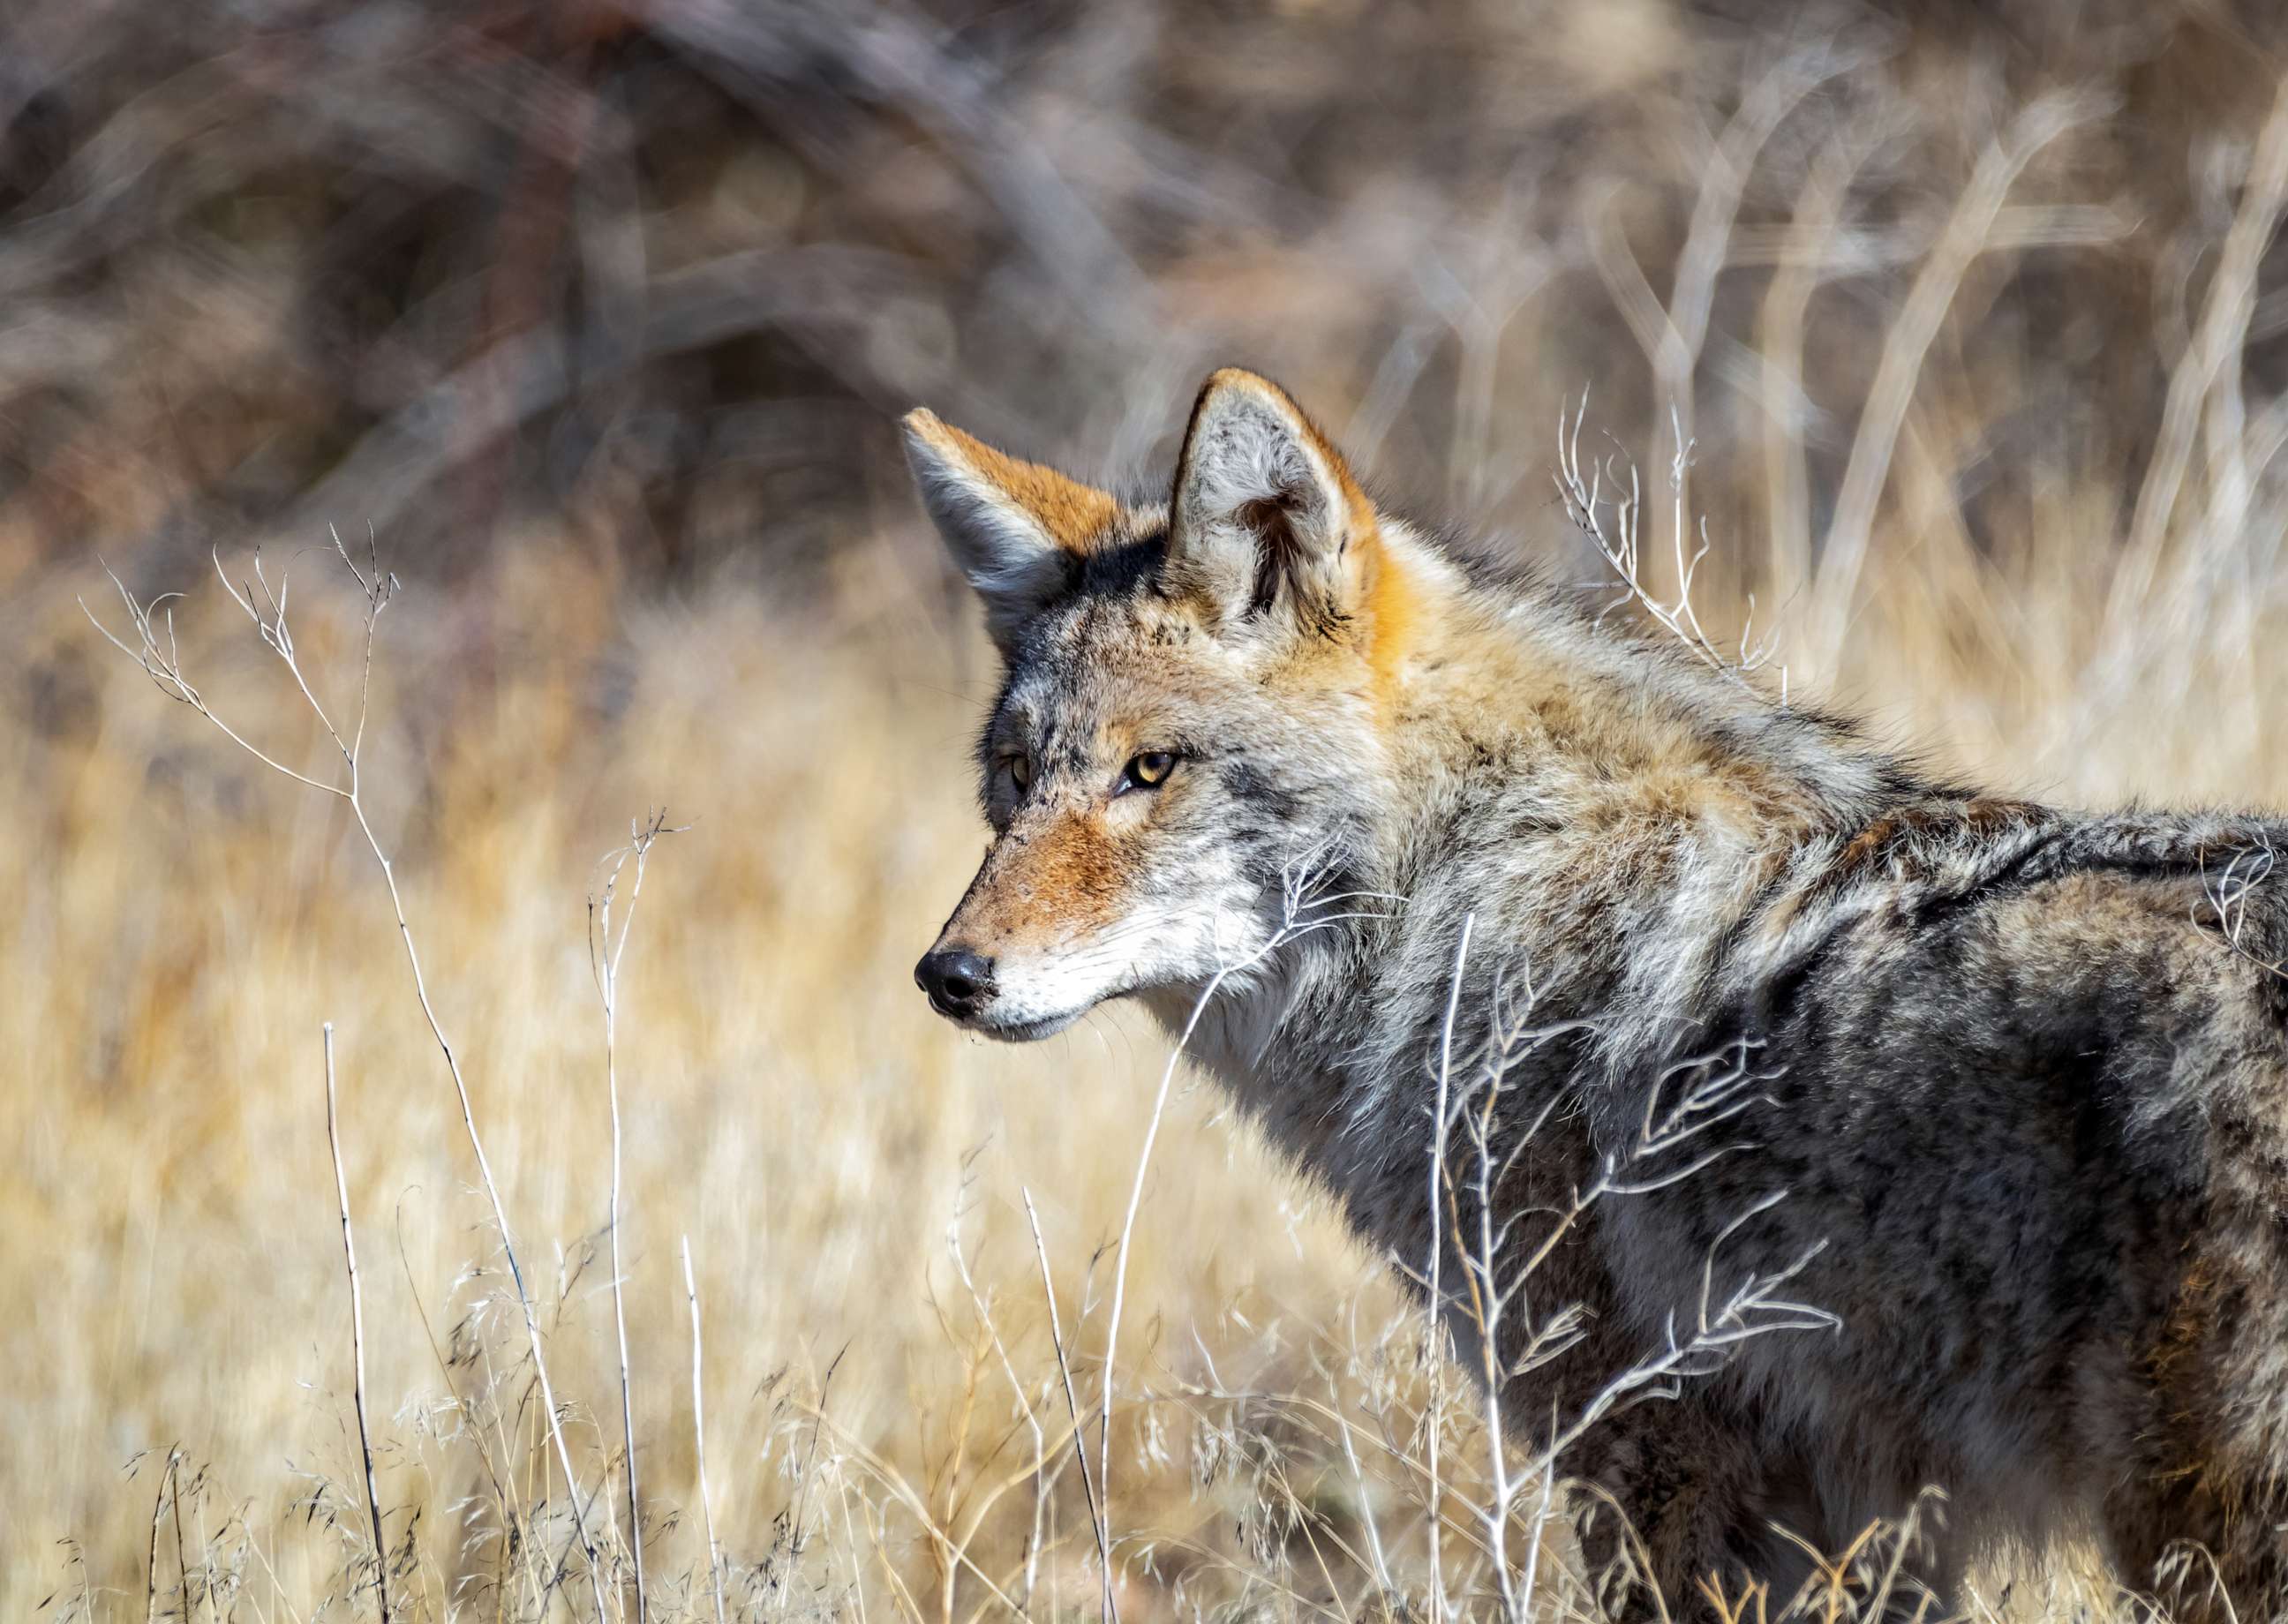 PHOTO: A coyote looks up from hunting for food on the Idaho prairie.